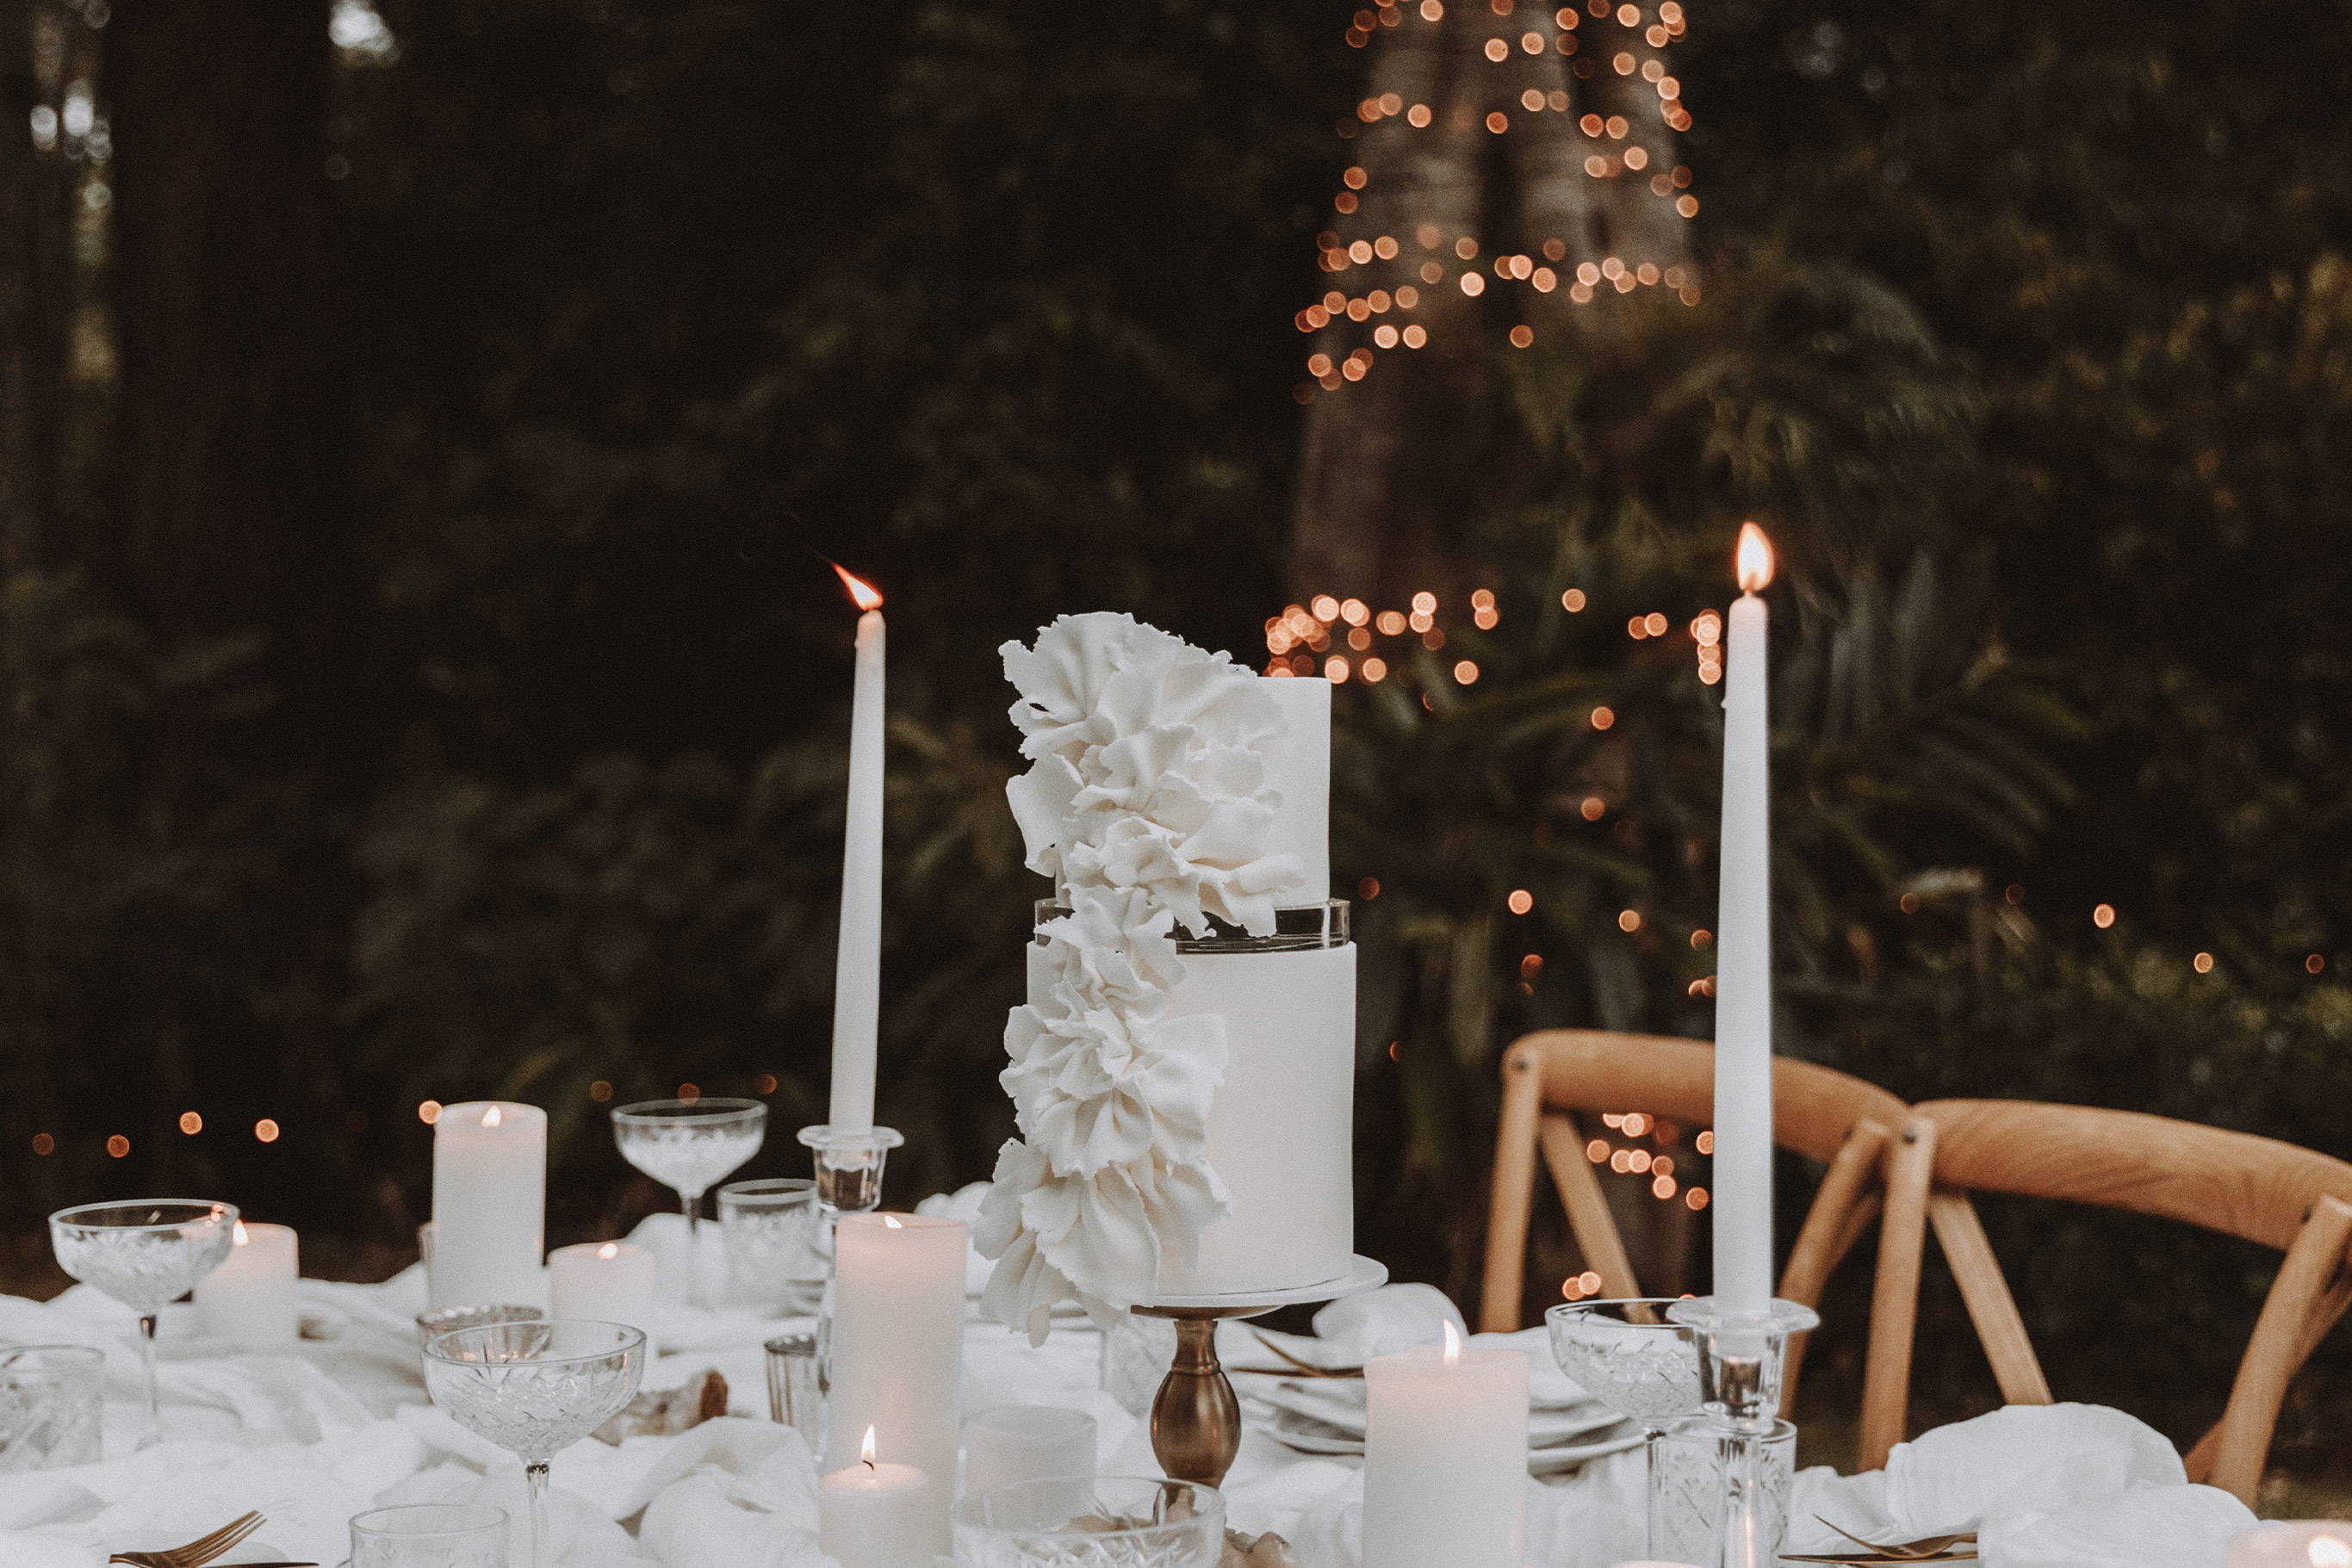 White wedding cake with white florals and candles on wedding table.